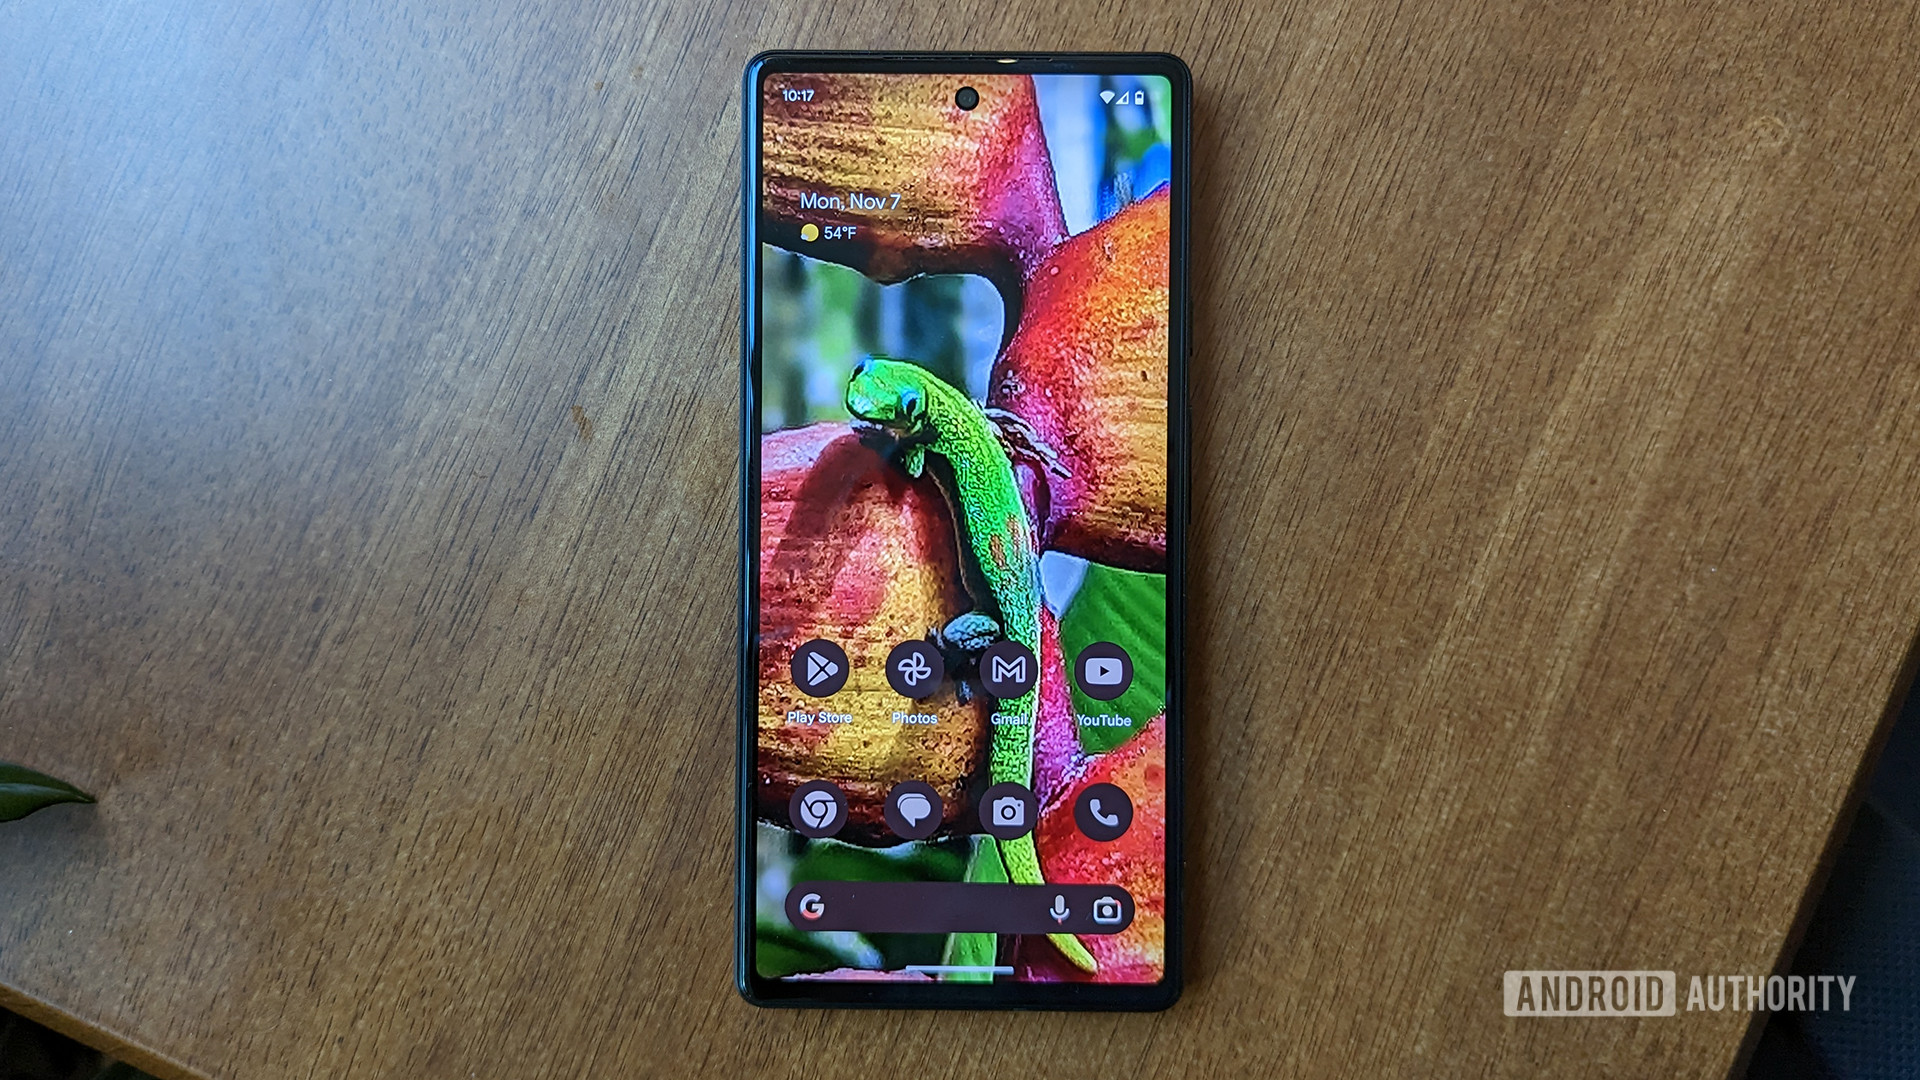 Wallpaper Wednesday: Android wallpapers 2022-11-09 - Android Authority